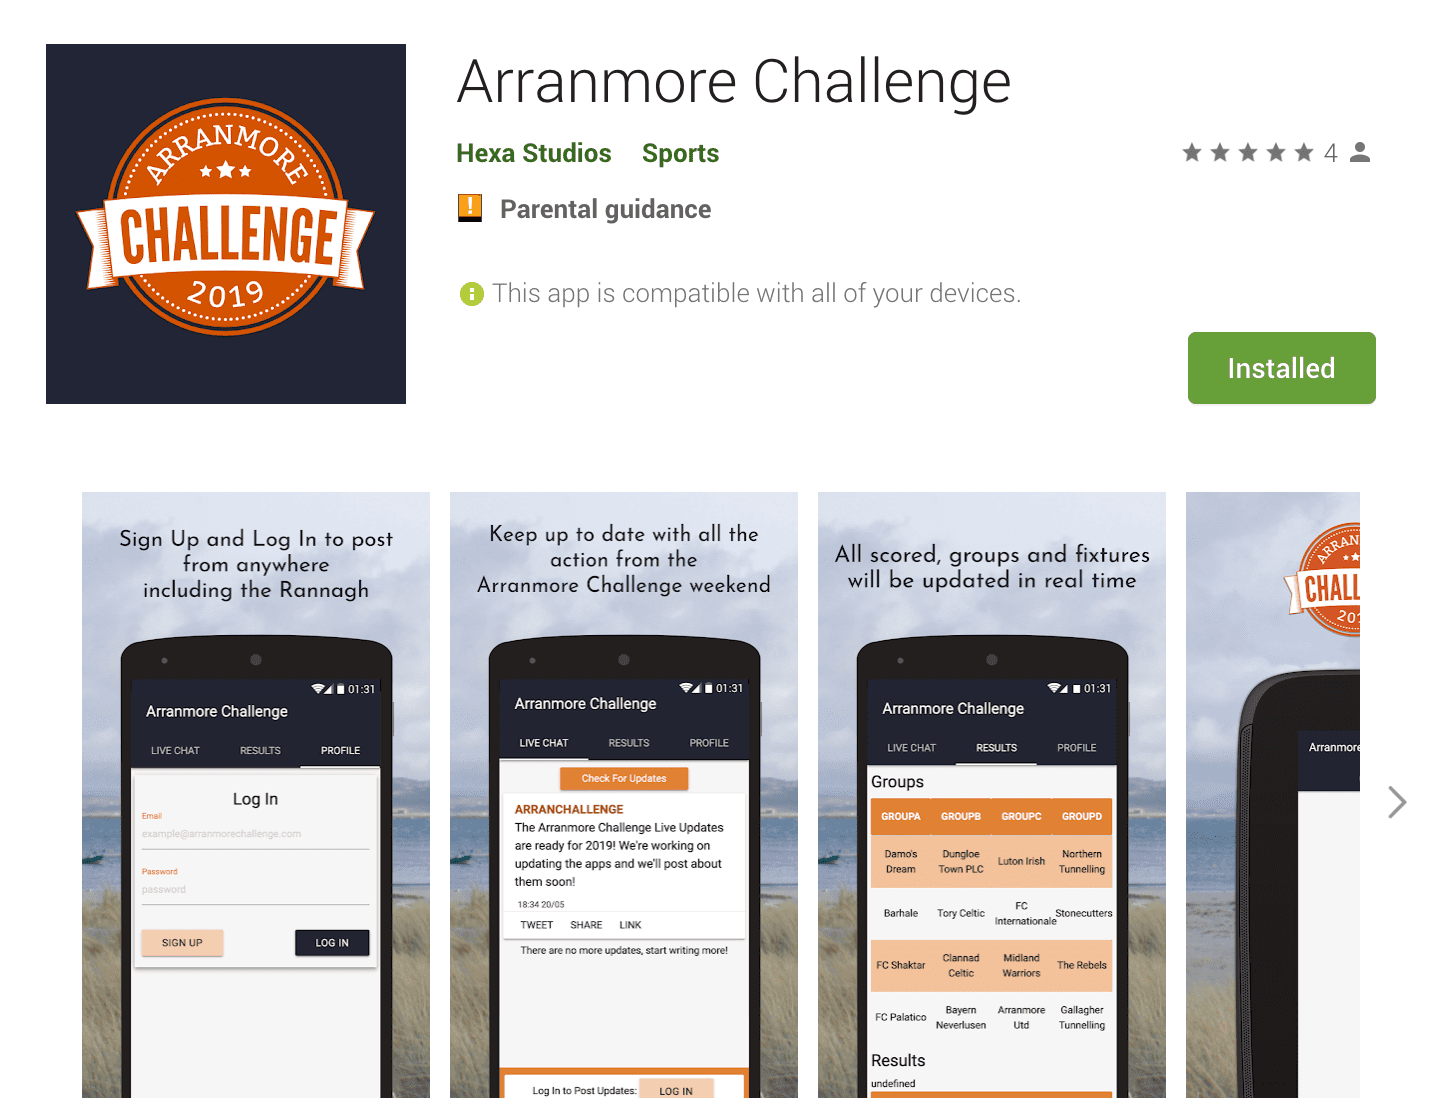 Arranmore Challenge Android App Store Listing